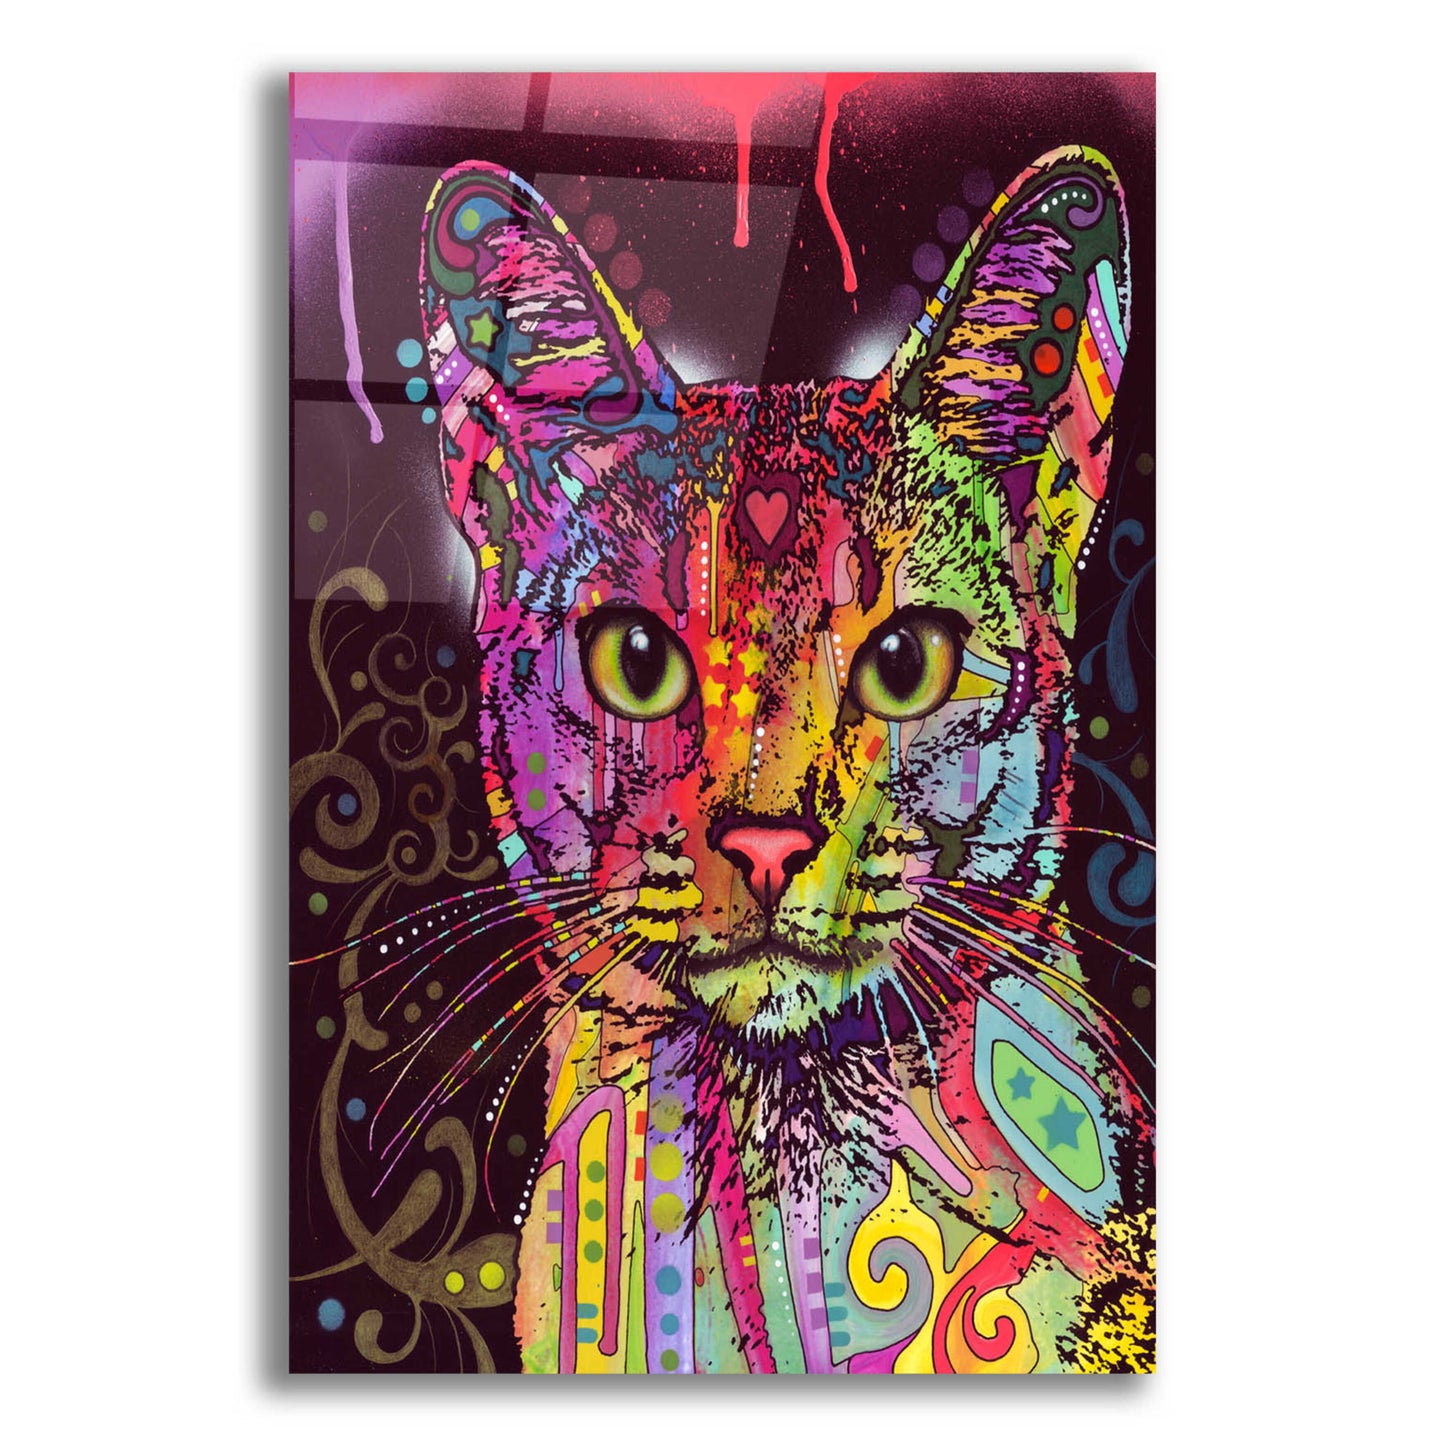 Epic Art 'Abyssinian' by Dean Russo, Acrylic Glass Wall Art,16x24